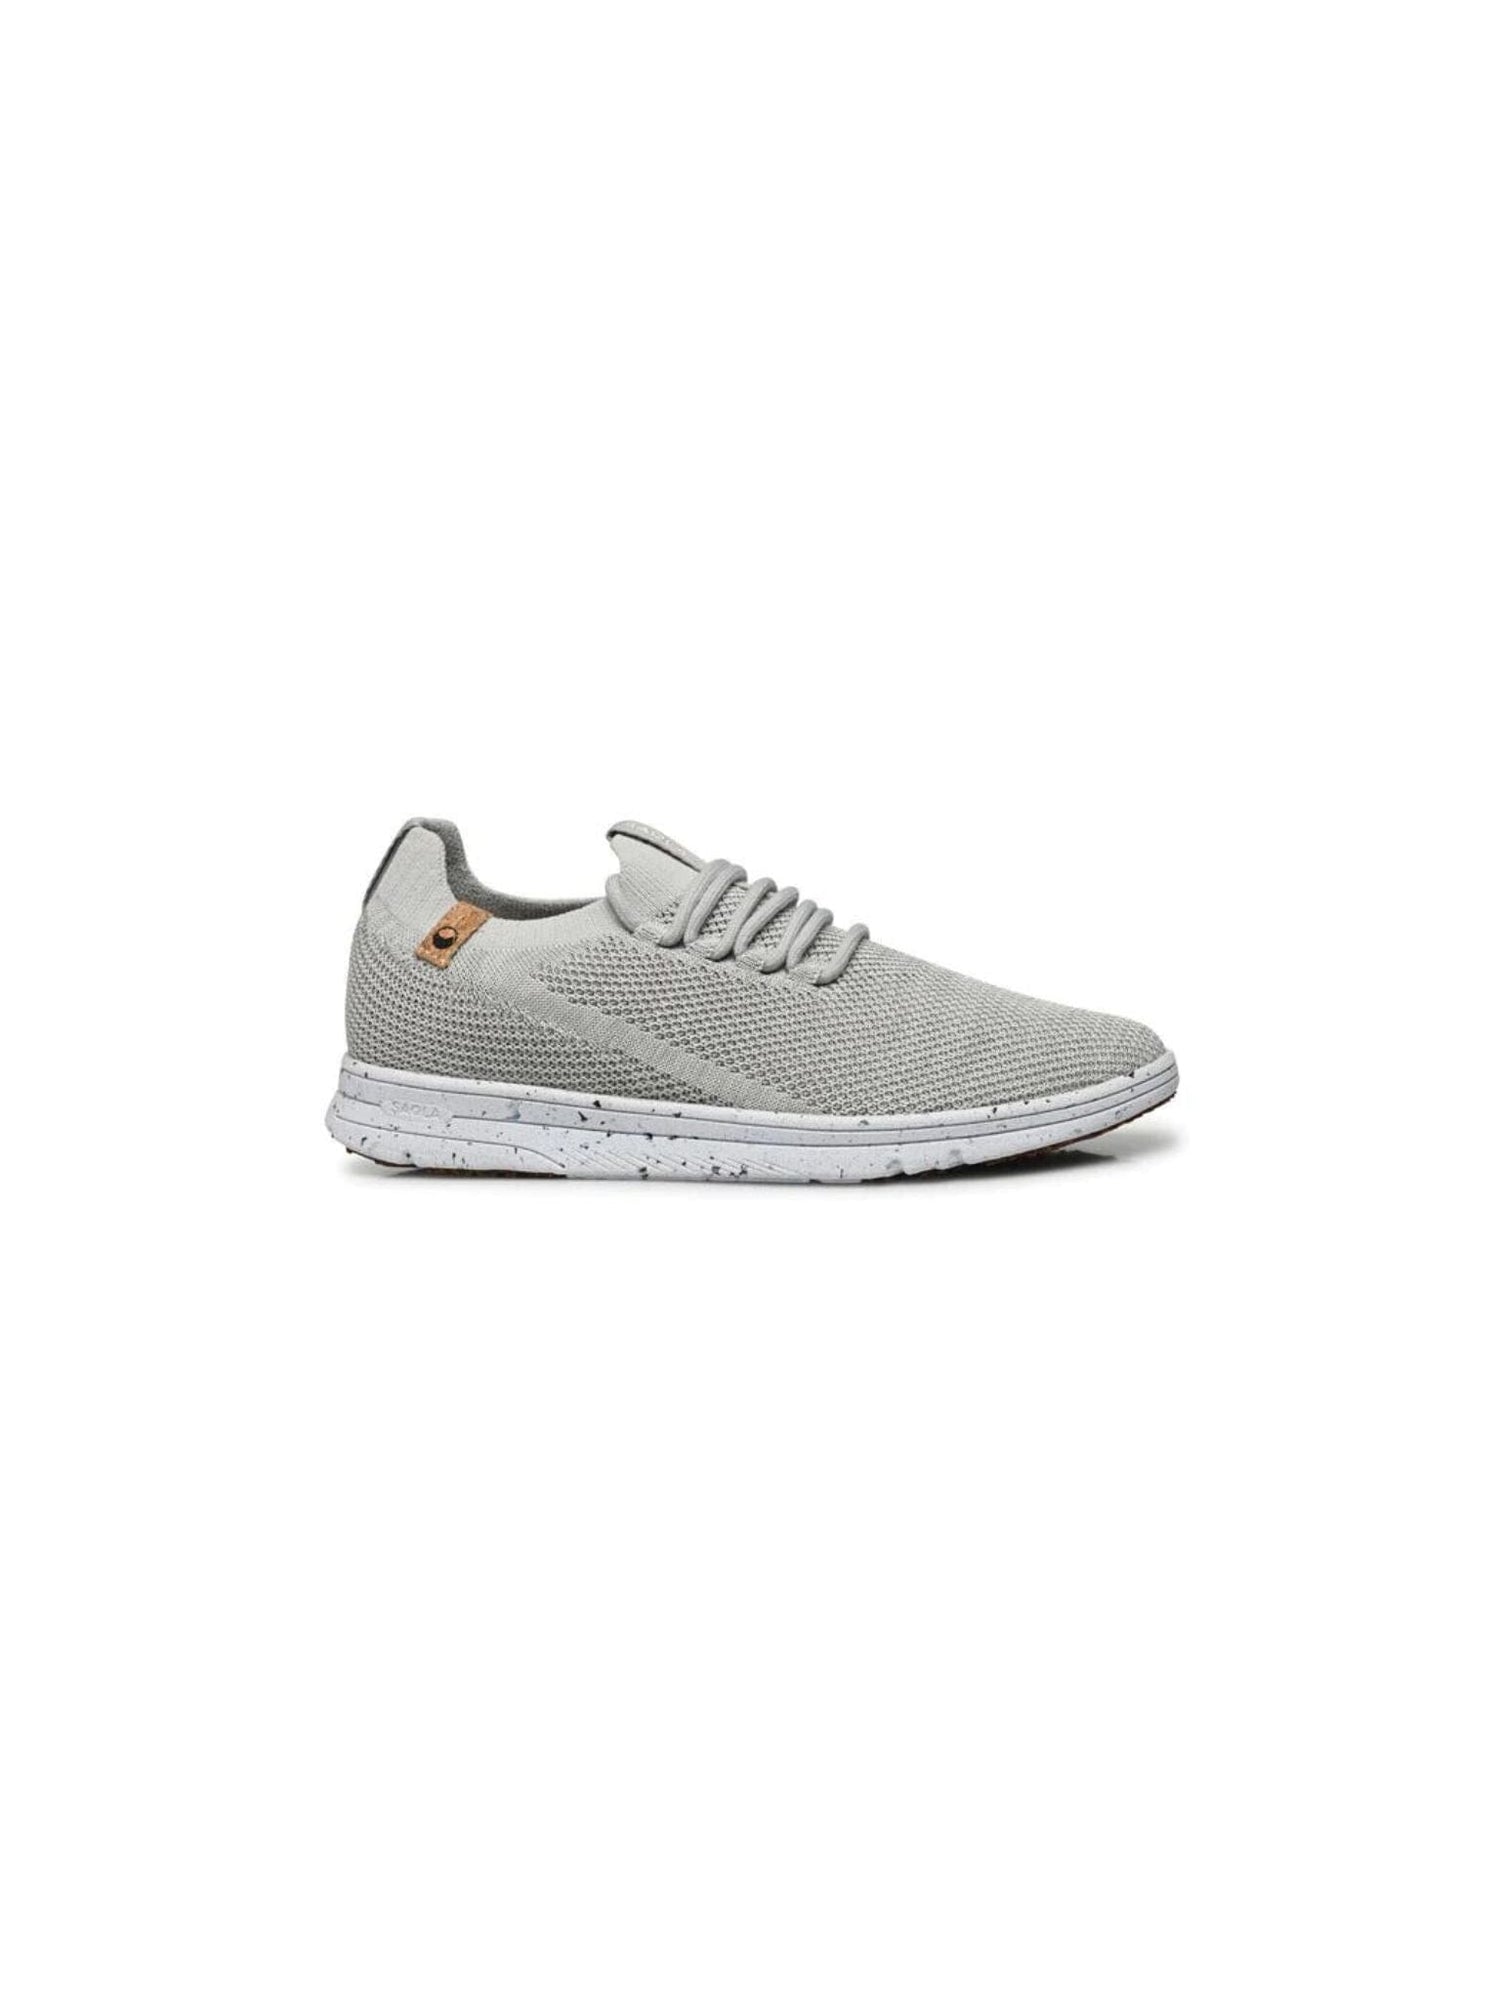 Saola W's Tsavo - 100% Vegan - Recycled and bio-sourced materials Light Grey 37 Shoes